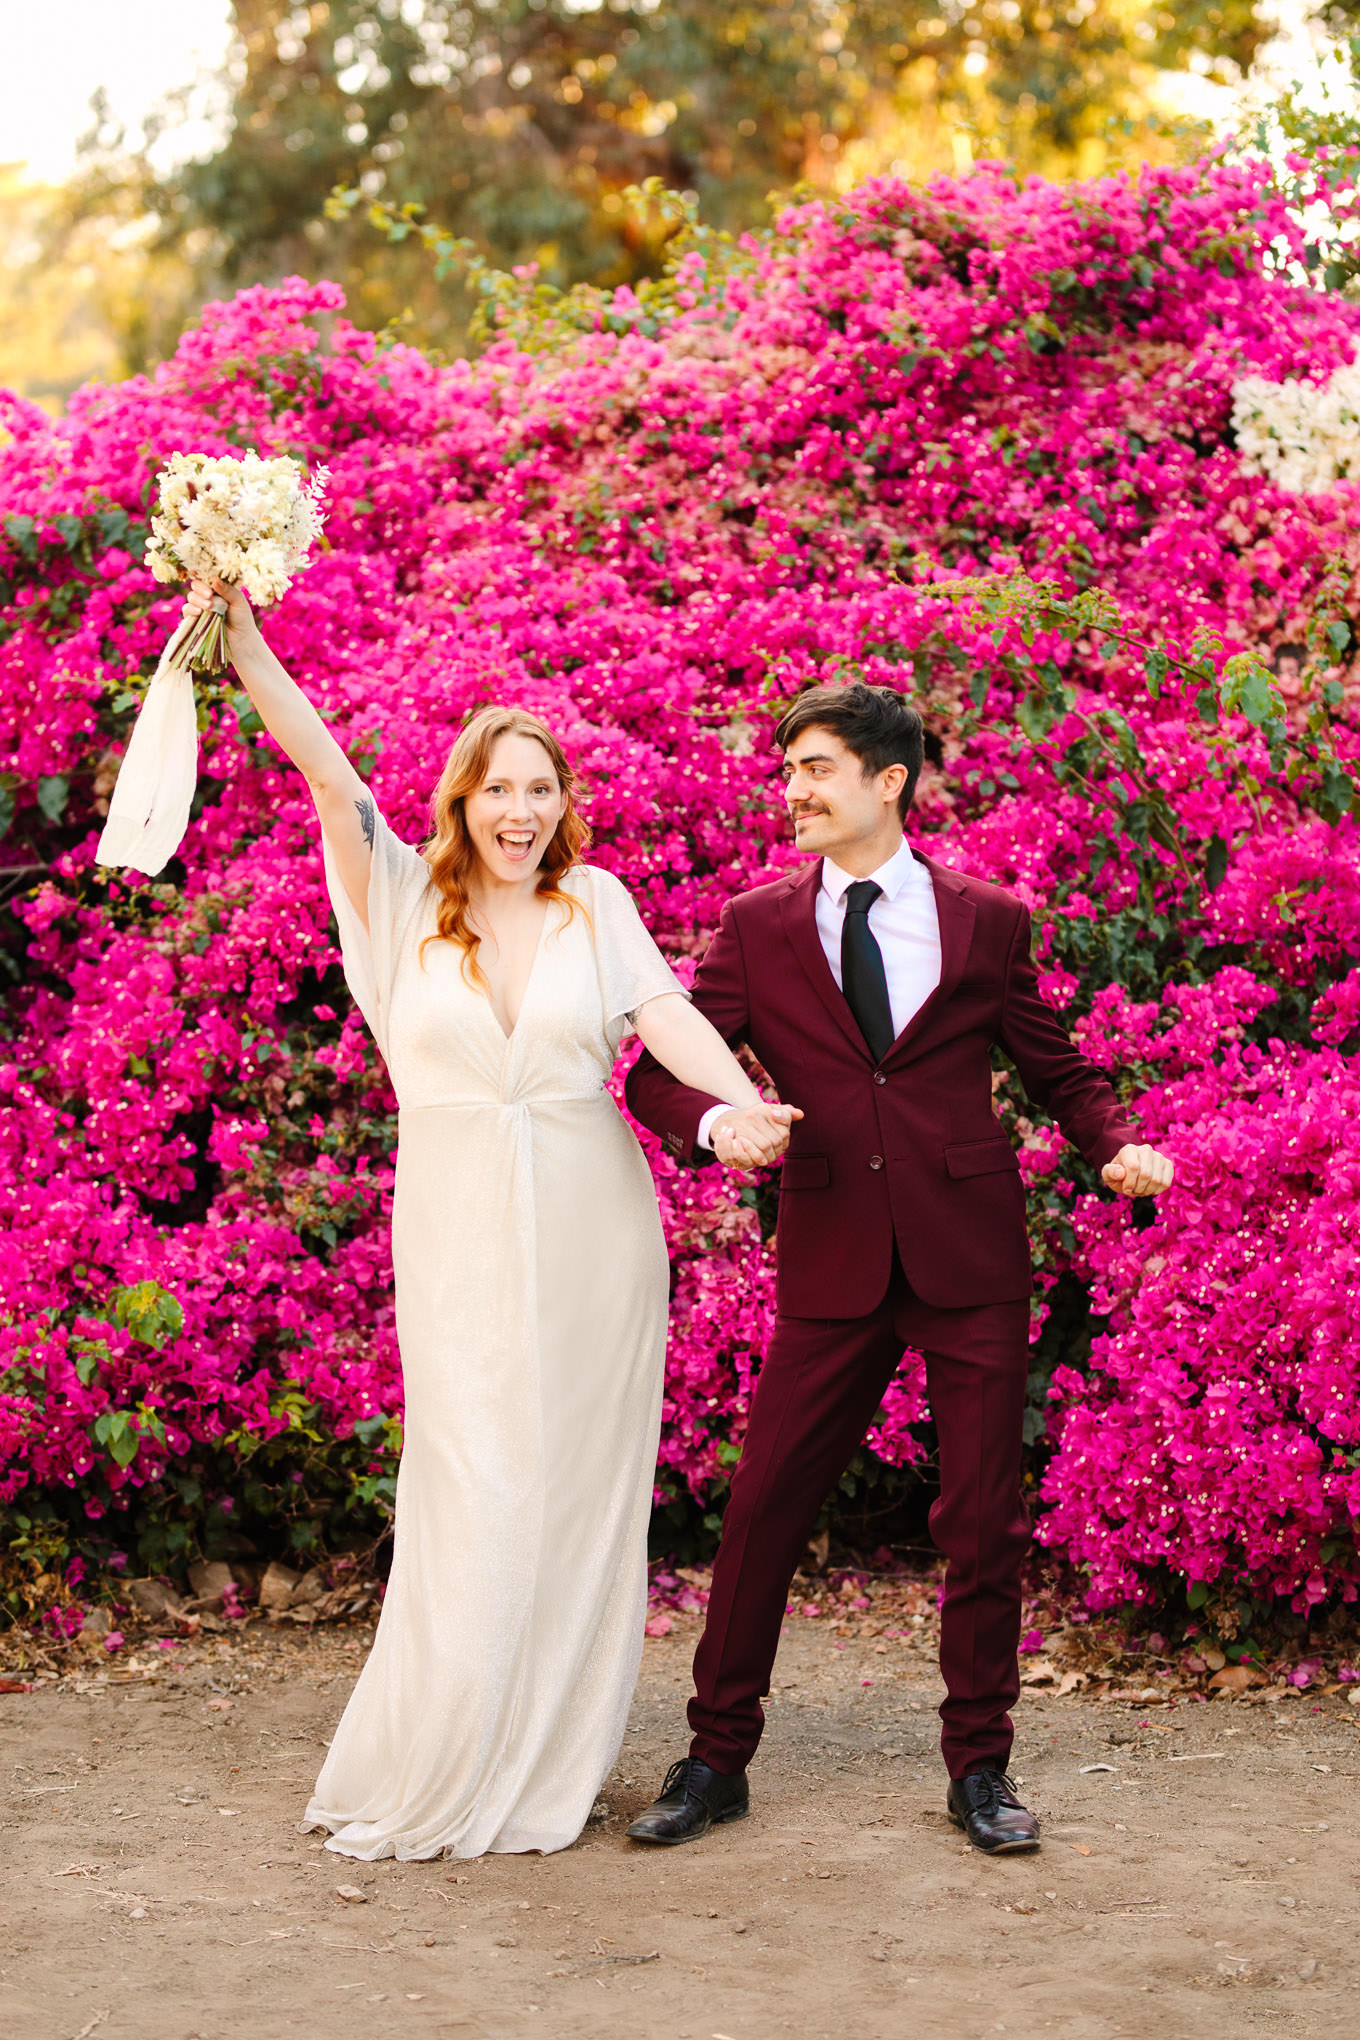 Bride and groom dancing in front of bougainvillea | Los Angeles Arboretum Elopement | Colorful and elevated wedding photography for fun-loving couples in Southern California | #LosAngelesElopement #elopement #LAarboretum #LAskyline #elopementphotos   Source: Mary Costa Photography | Los Angeles